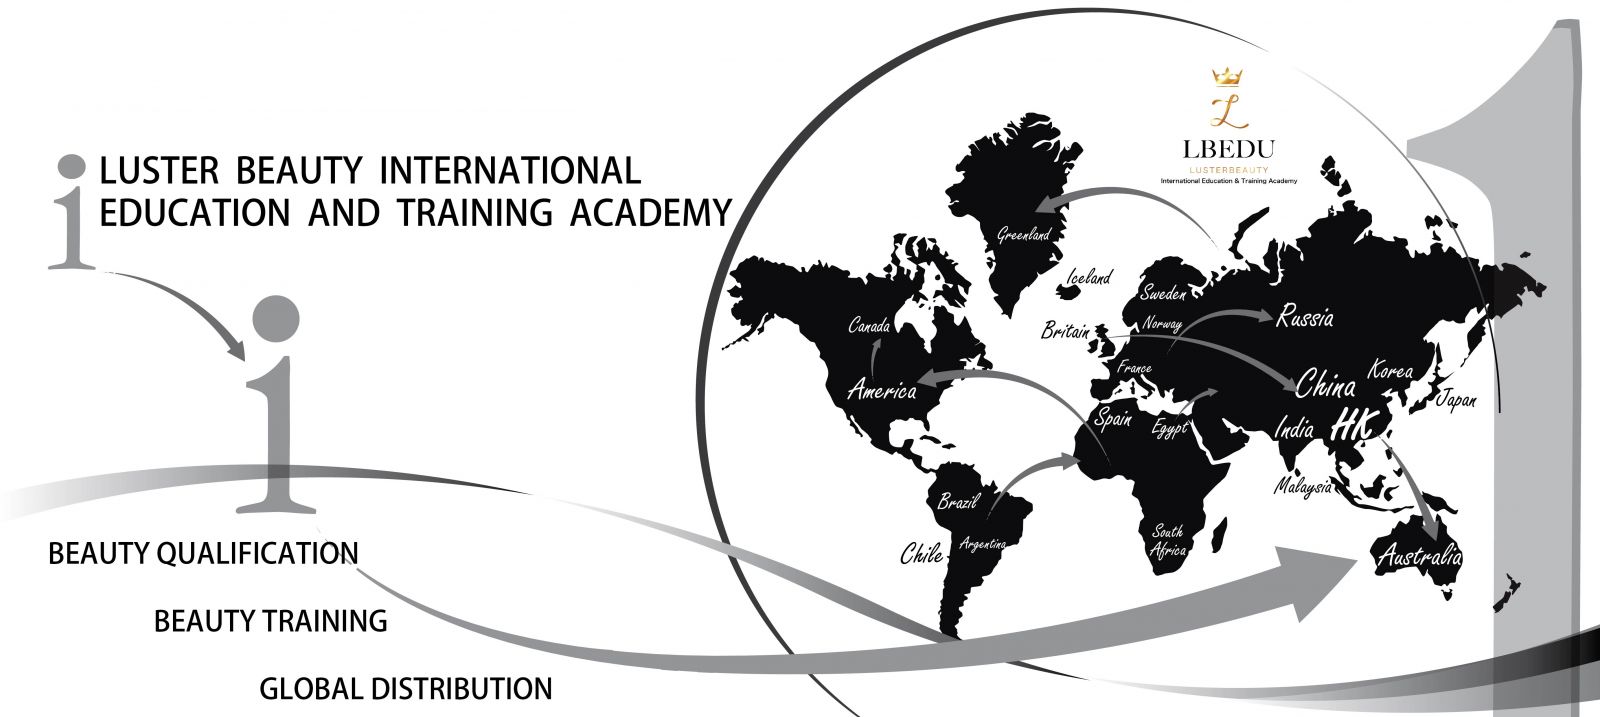 lbacademy.com.hk luster beauty international education and training academy about us background